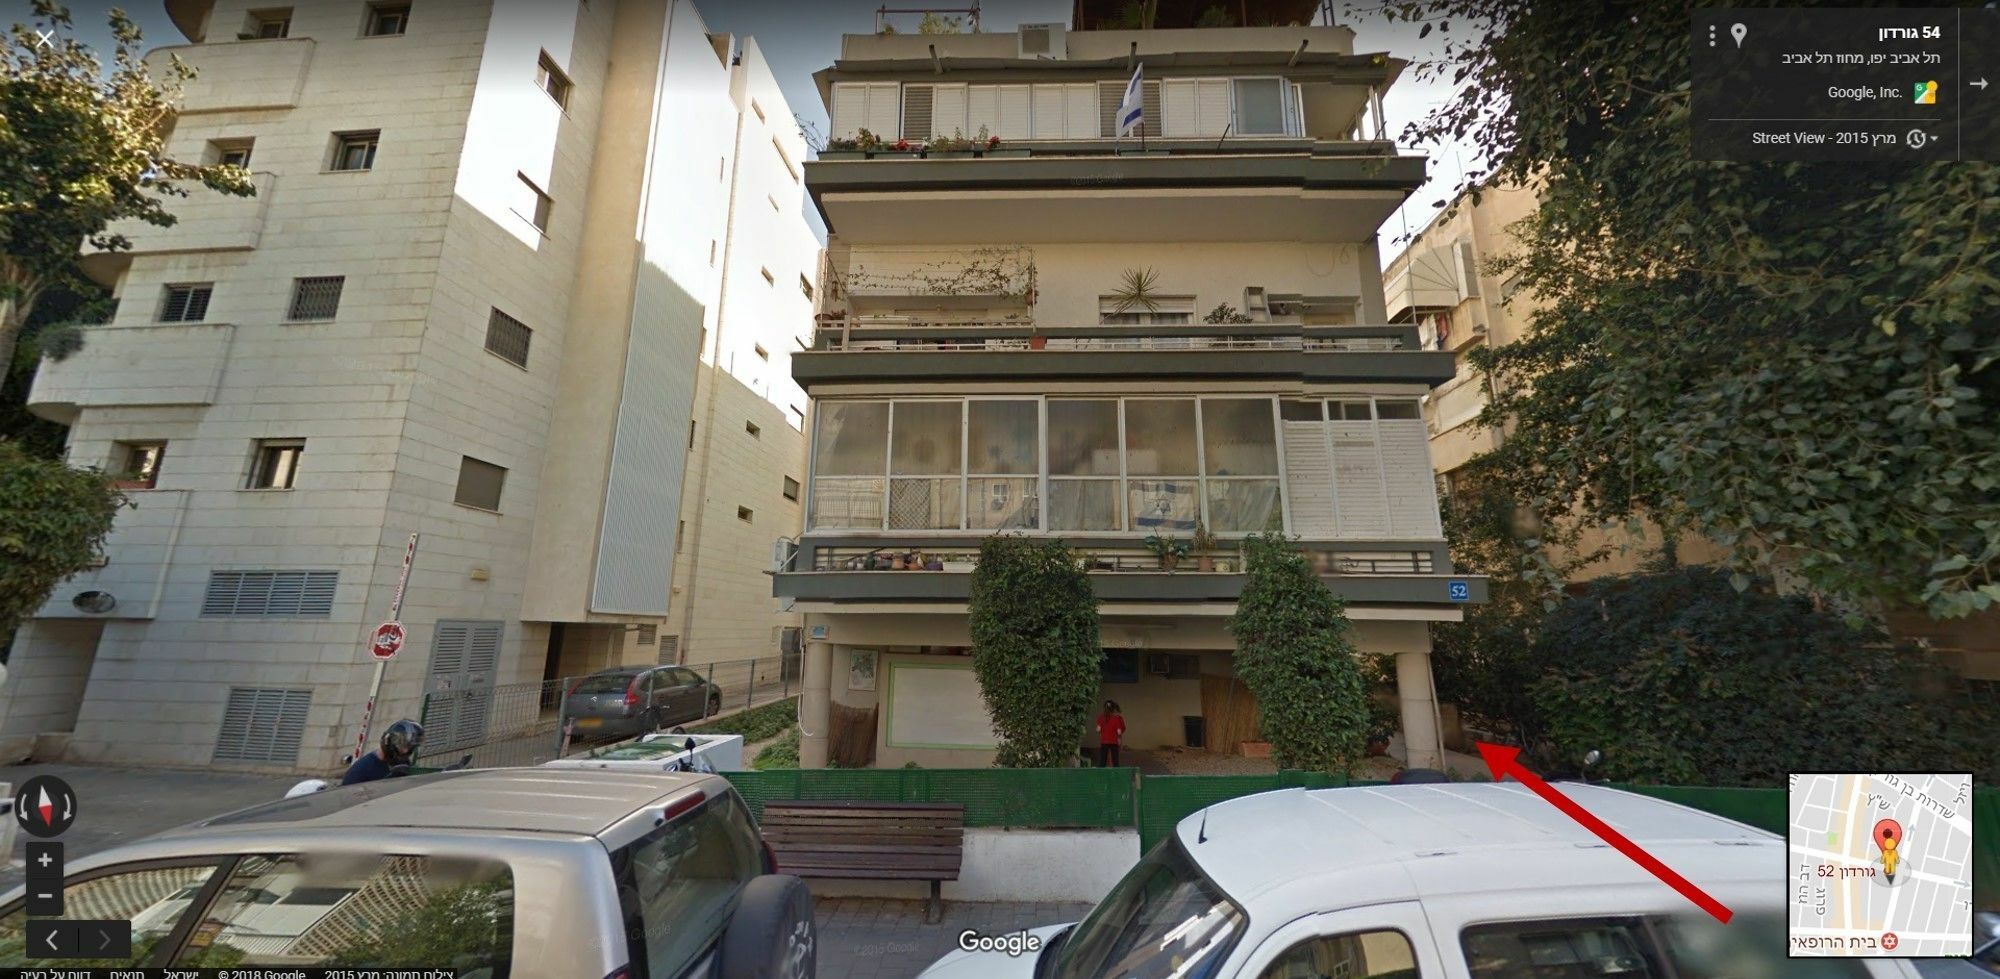 Arianked Palace With Private Parking Tel Aviv Exterior photo